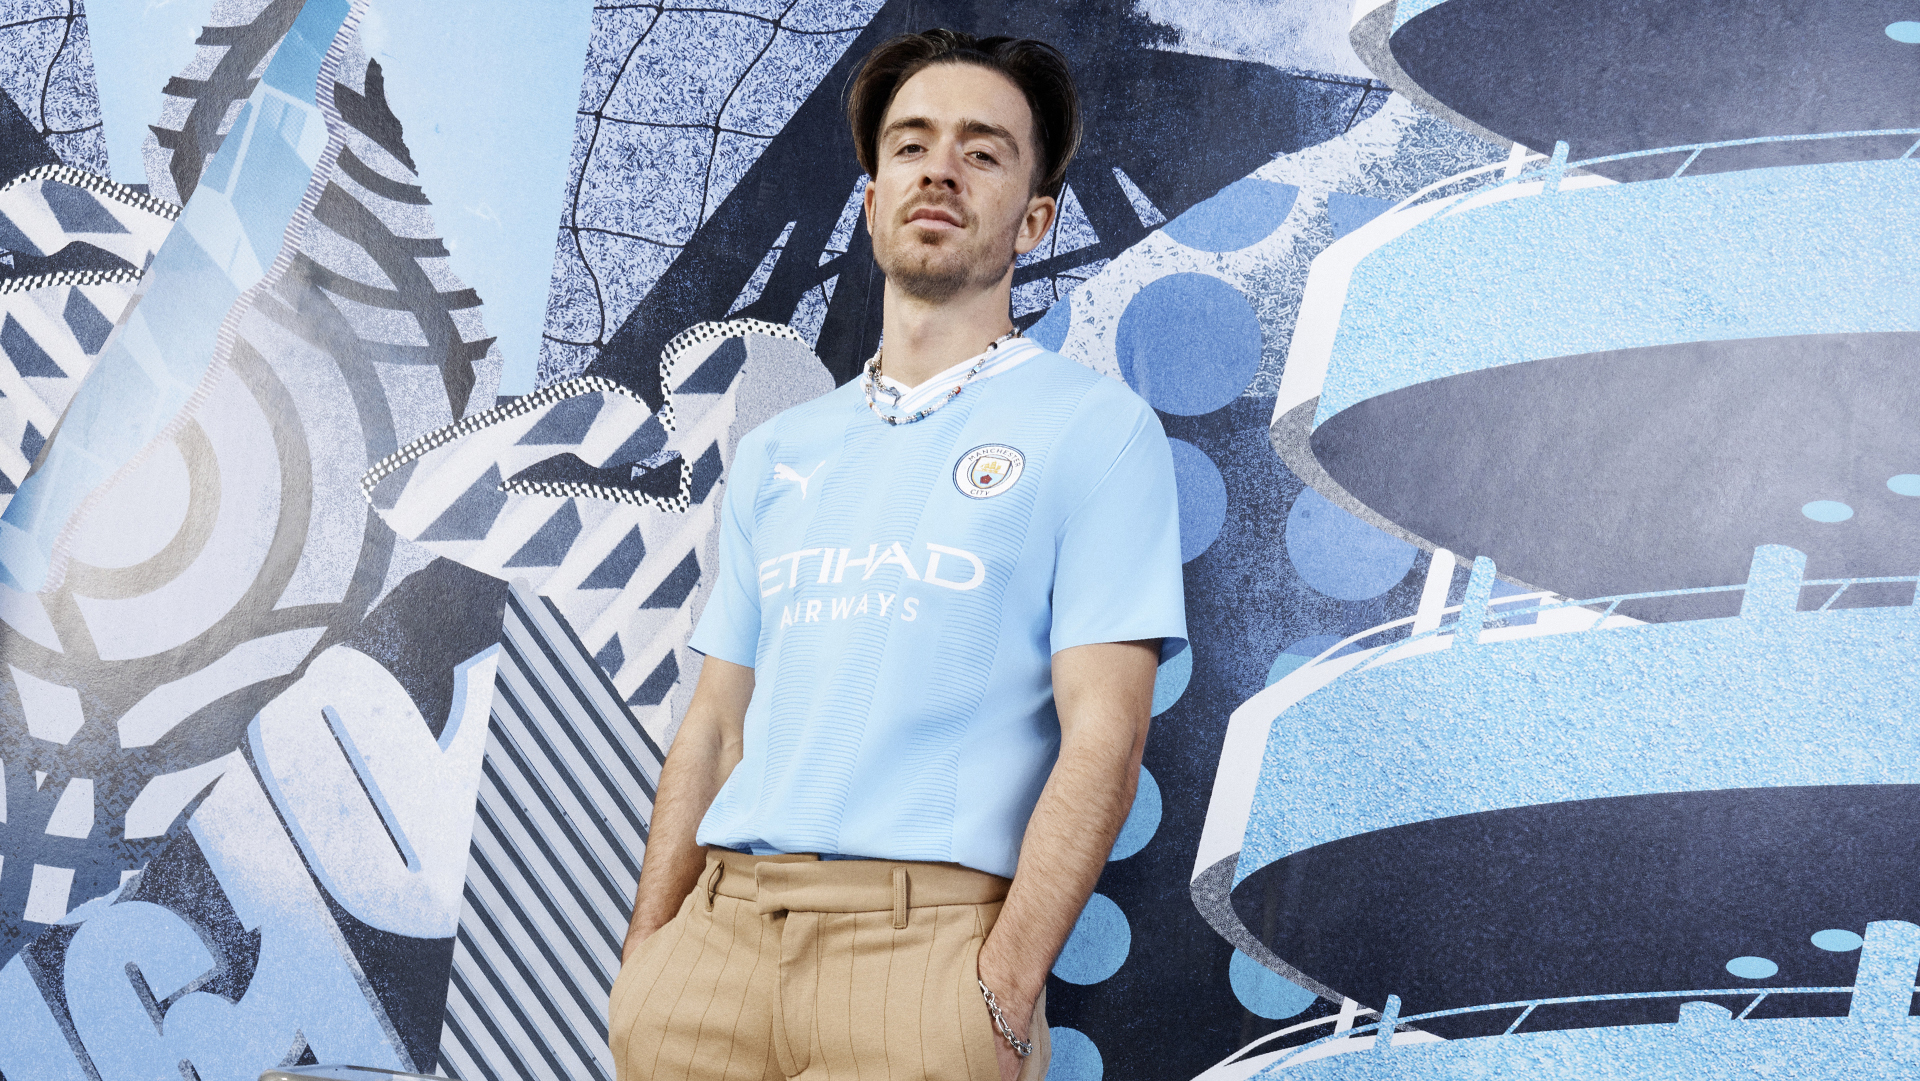 New Manchester City home shirt for the 23/24 season